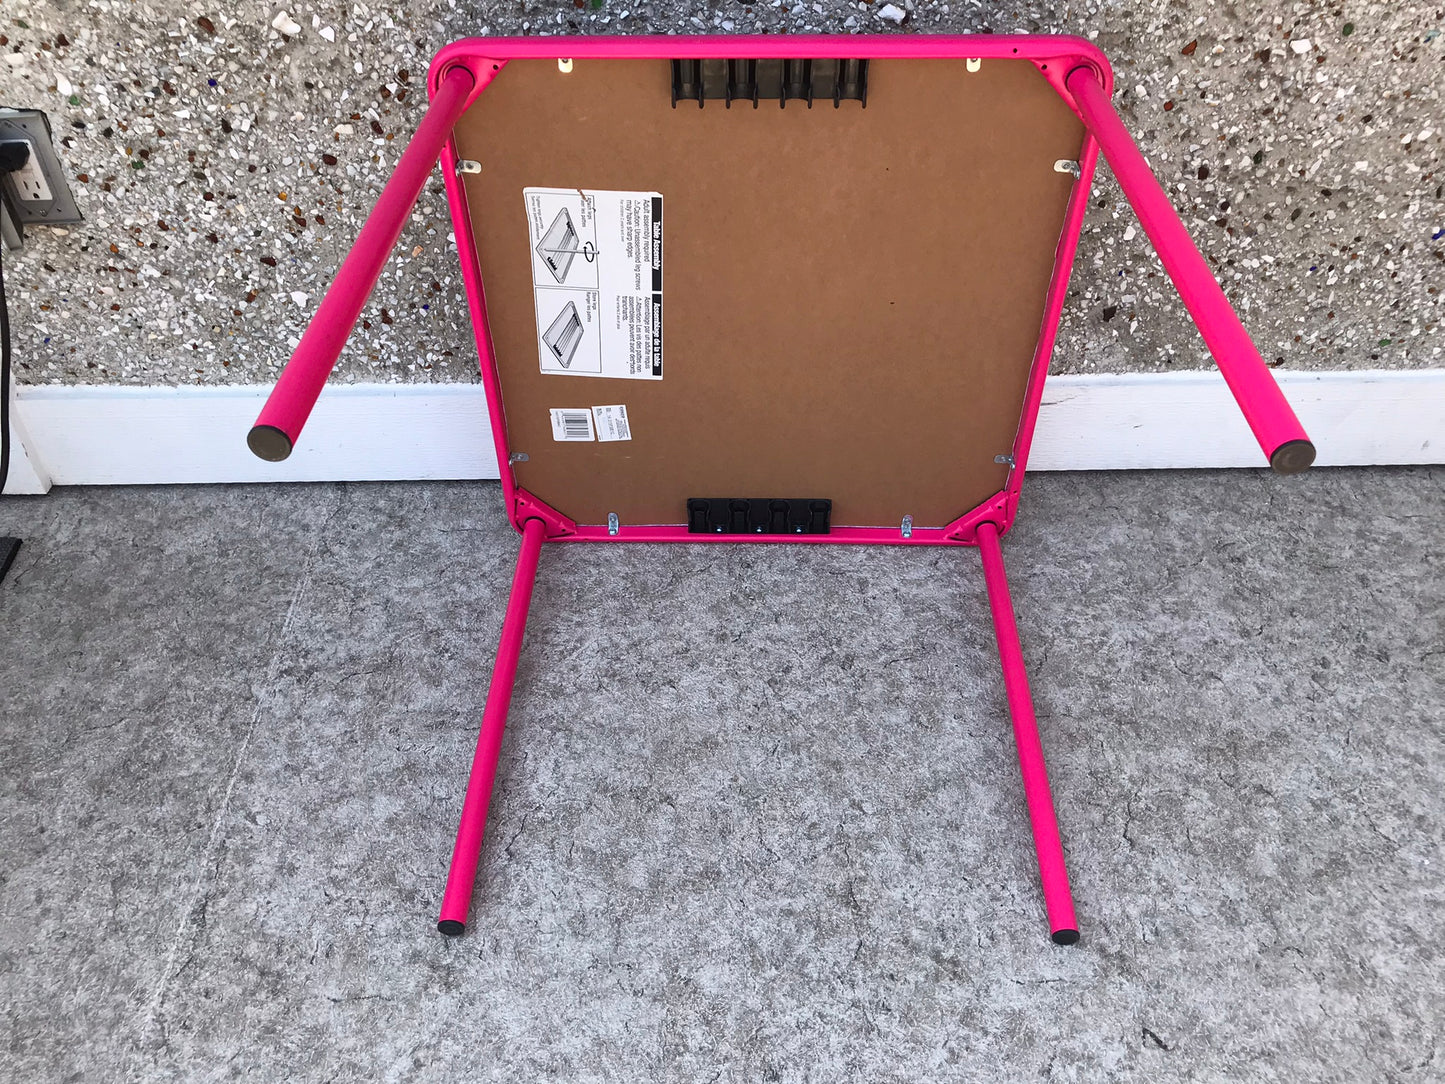 Children's Hot Pink Bubblegum Soft Top Party Table 24 x 24 x 24  inch Ideal for arts and crafts and parties. Legs Unscrew sit in brackets underneath for easy storage.